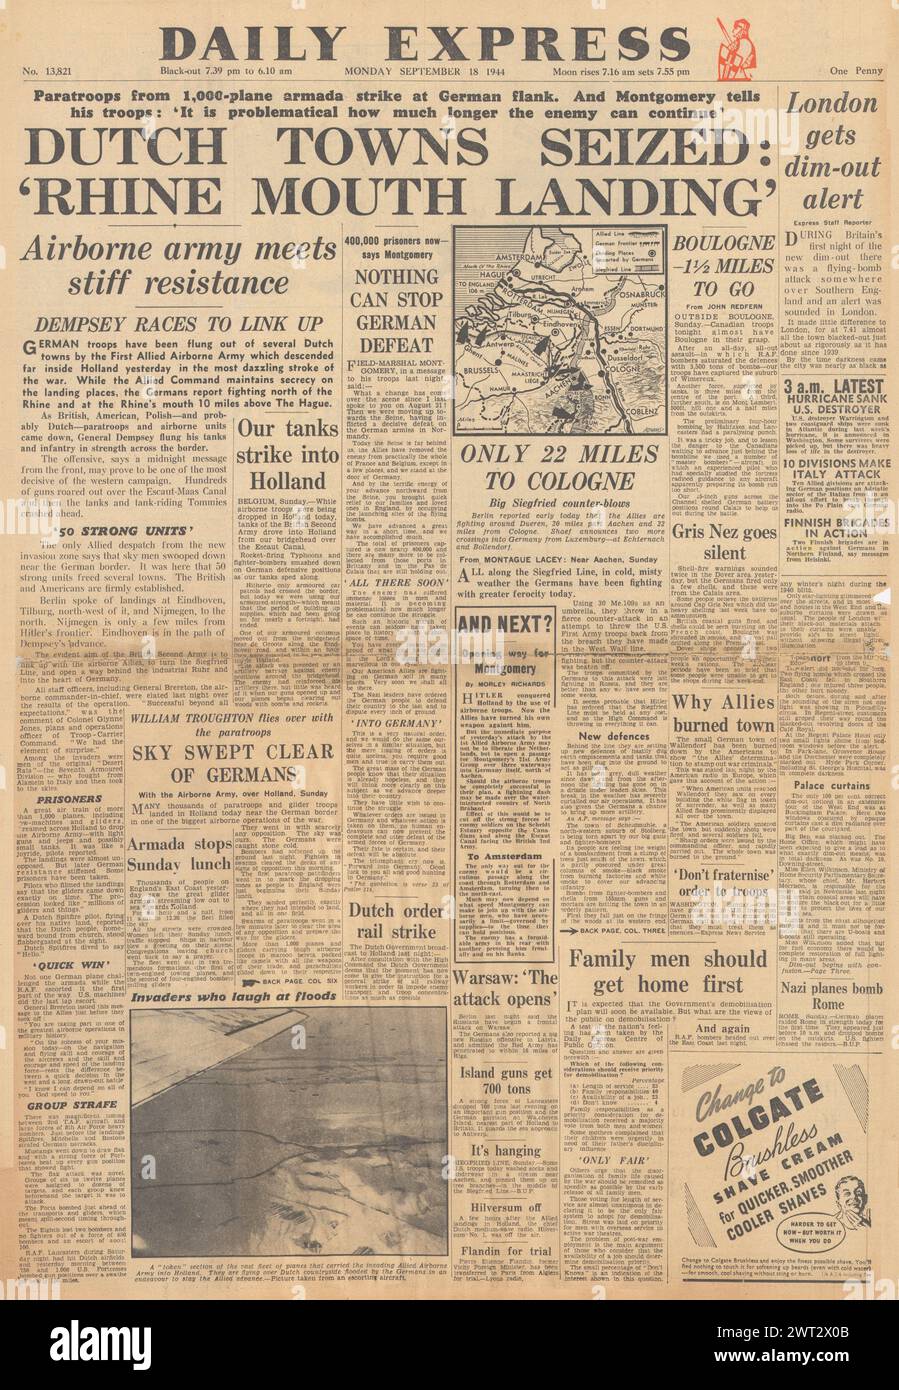 1944 Daily Express front page reporting Battle of Arnhem and Allies advance on Cologne Stock Photo